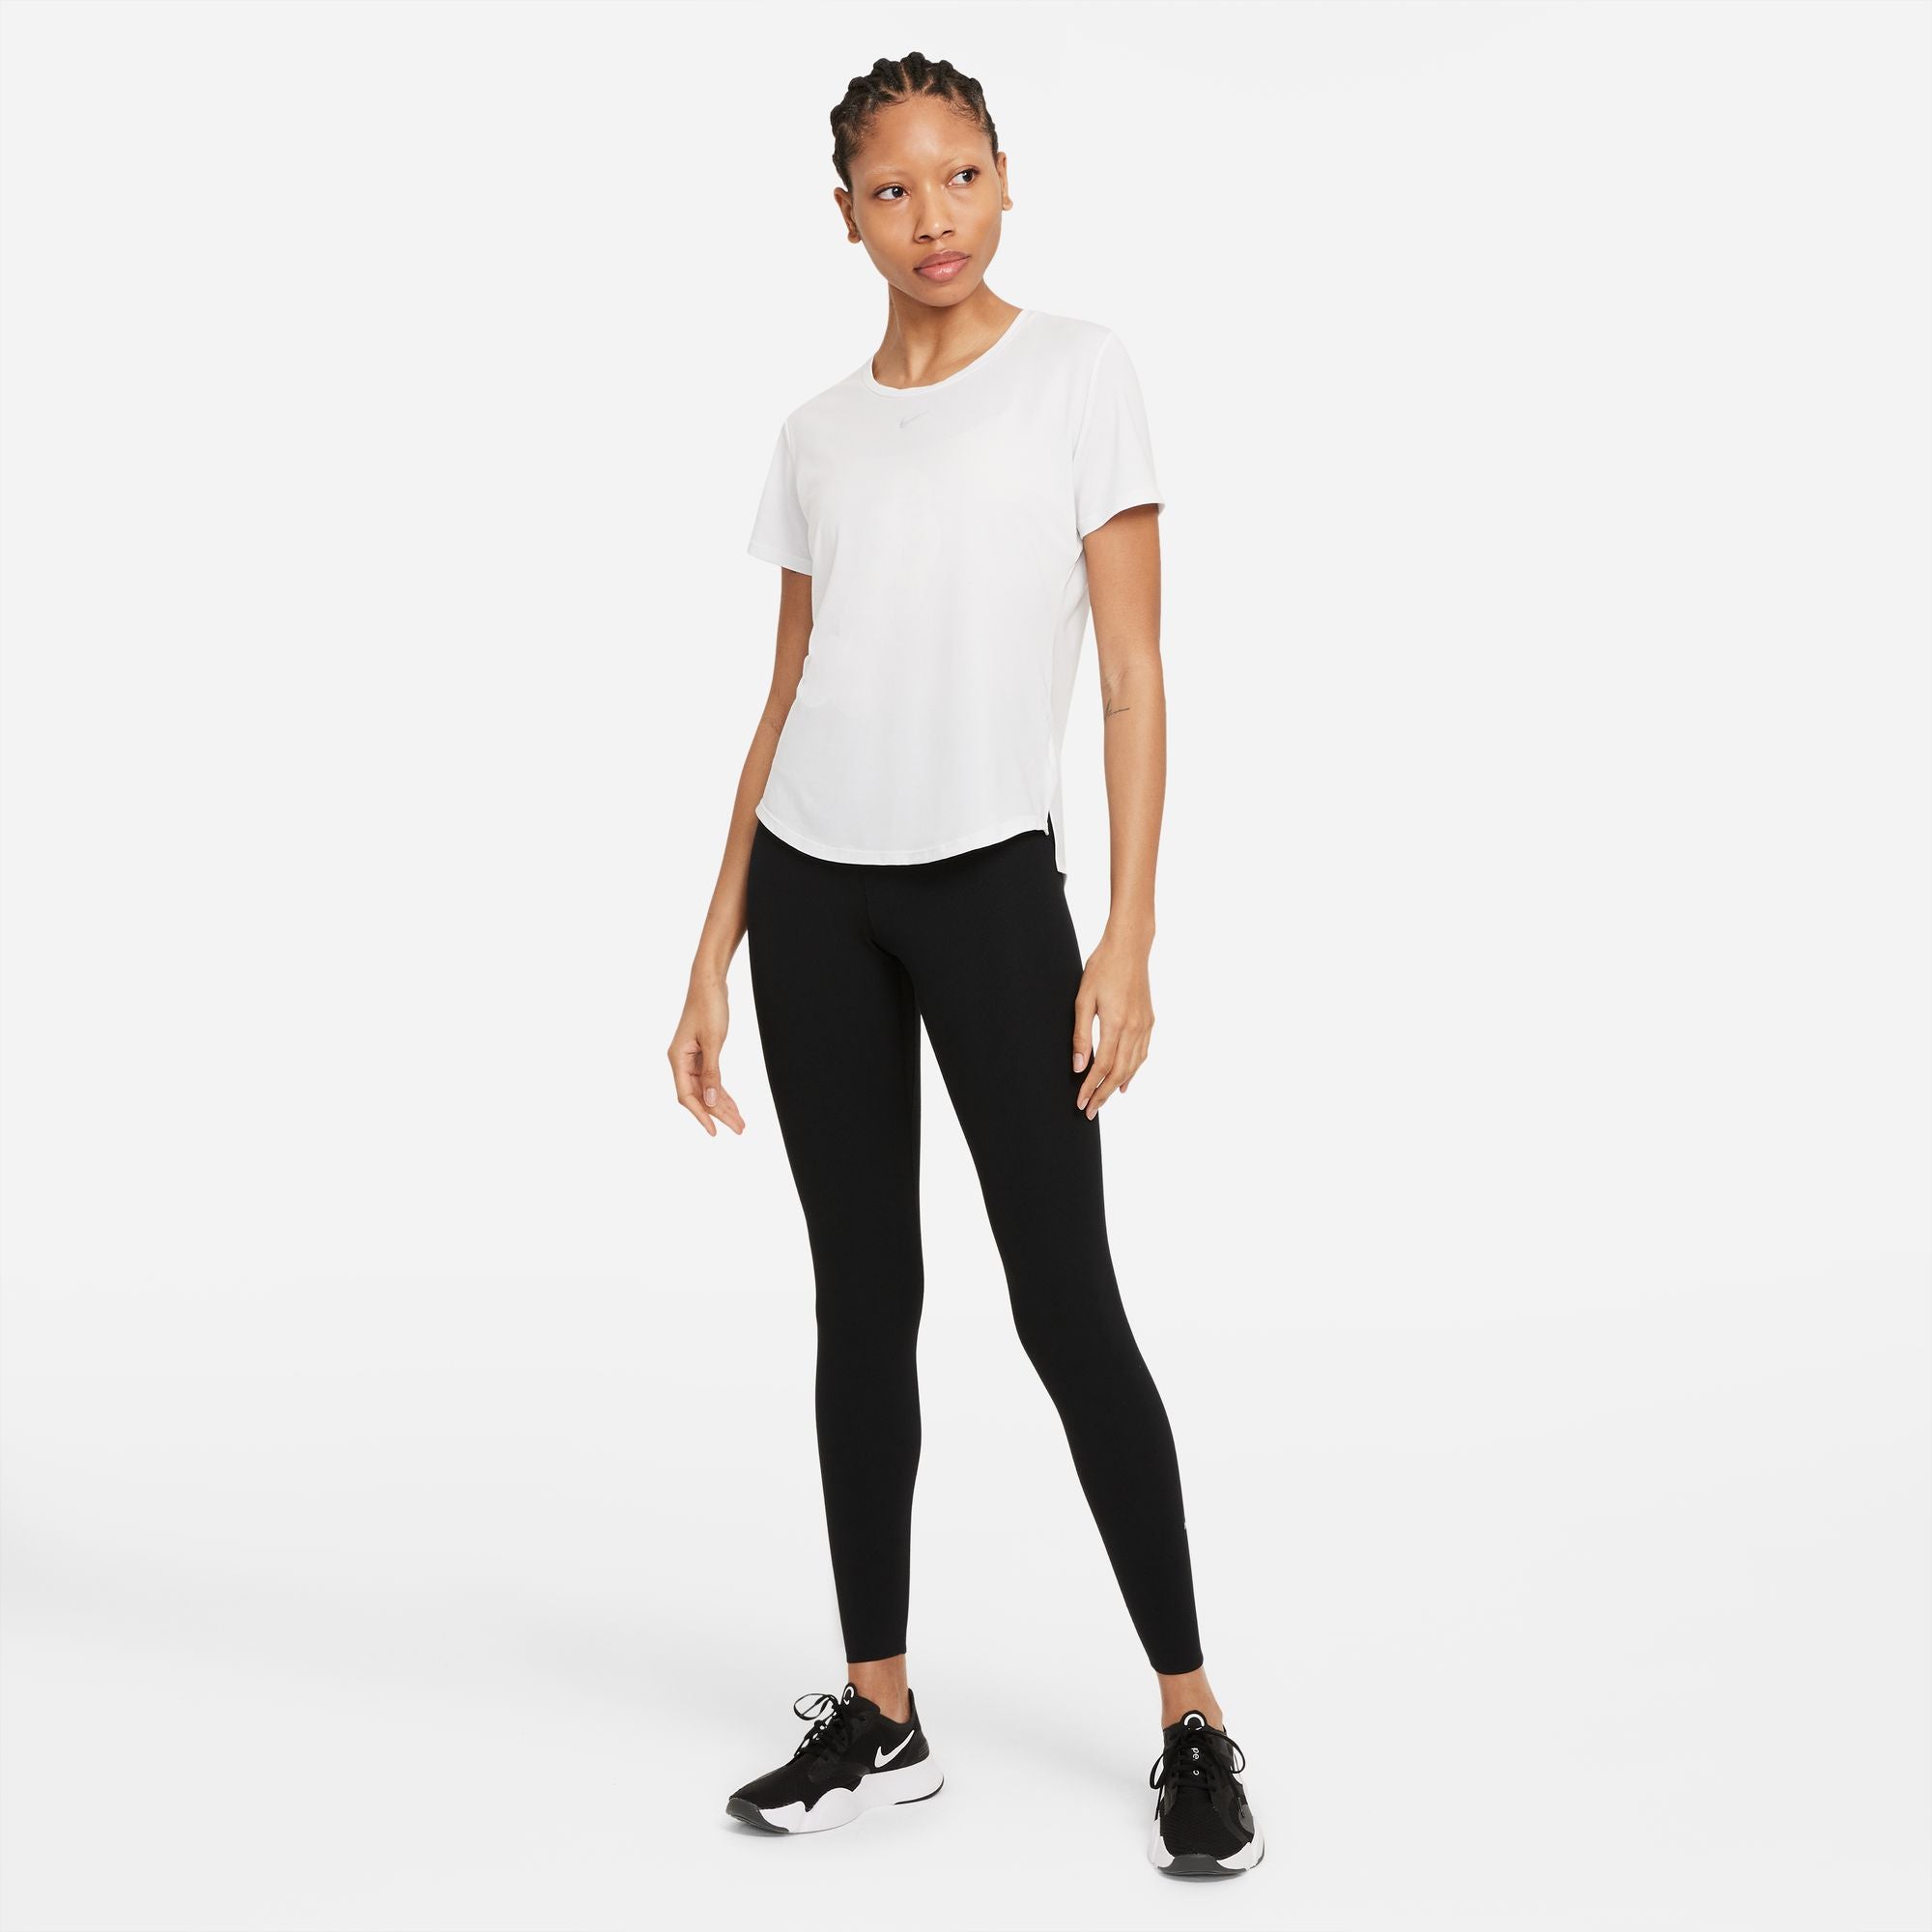 Nike One Luxe Dri-FIT Women's Standard Fit Shirt White (5)